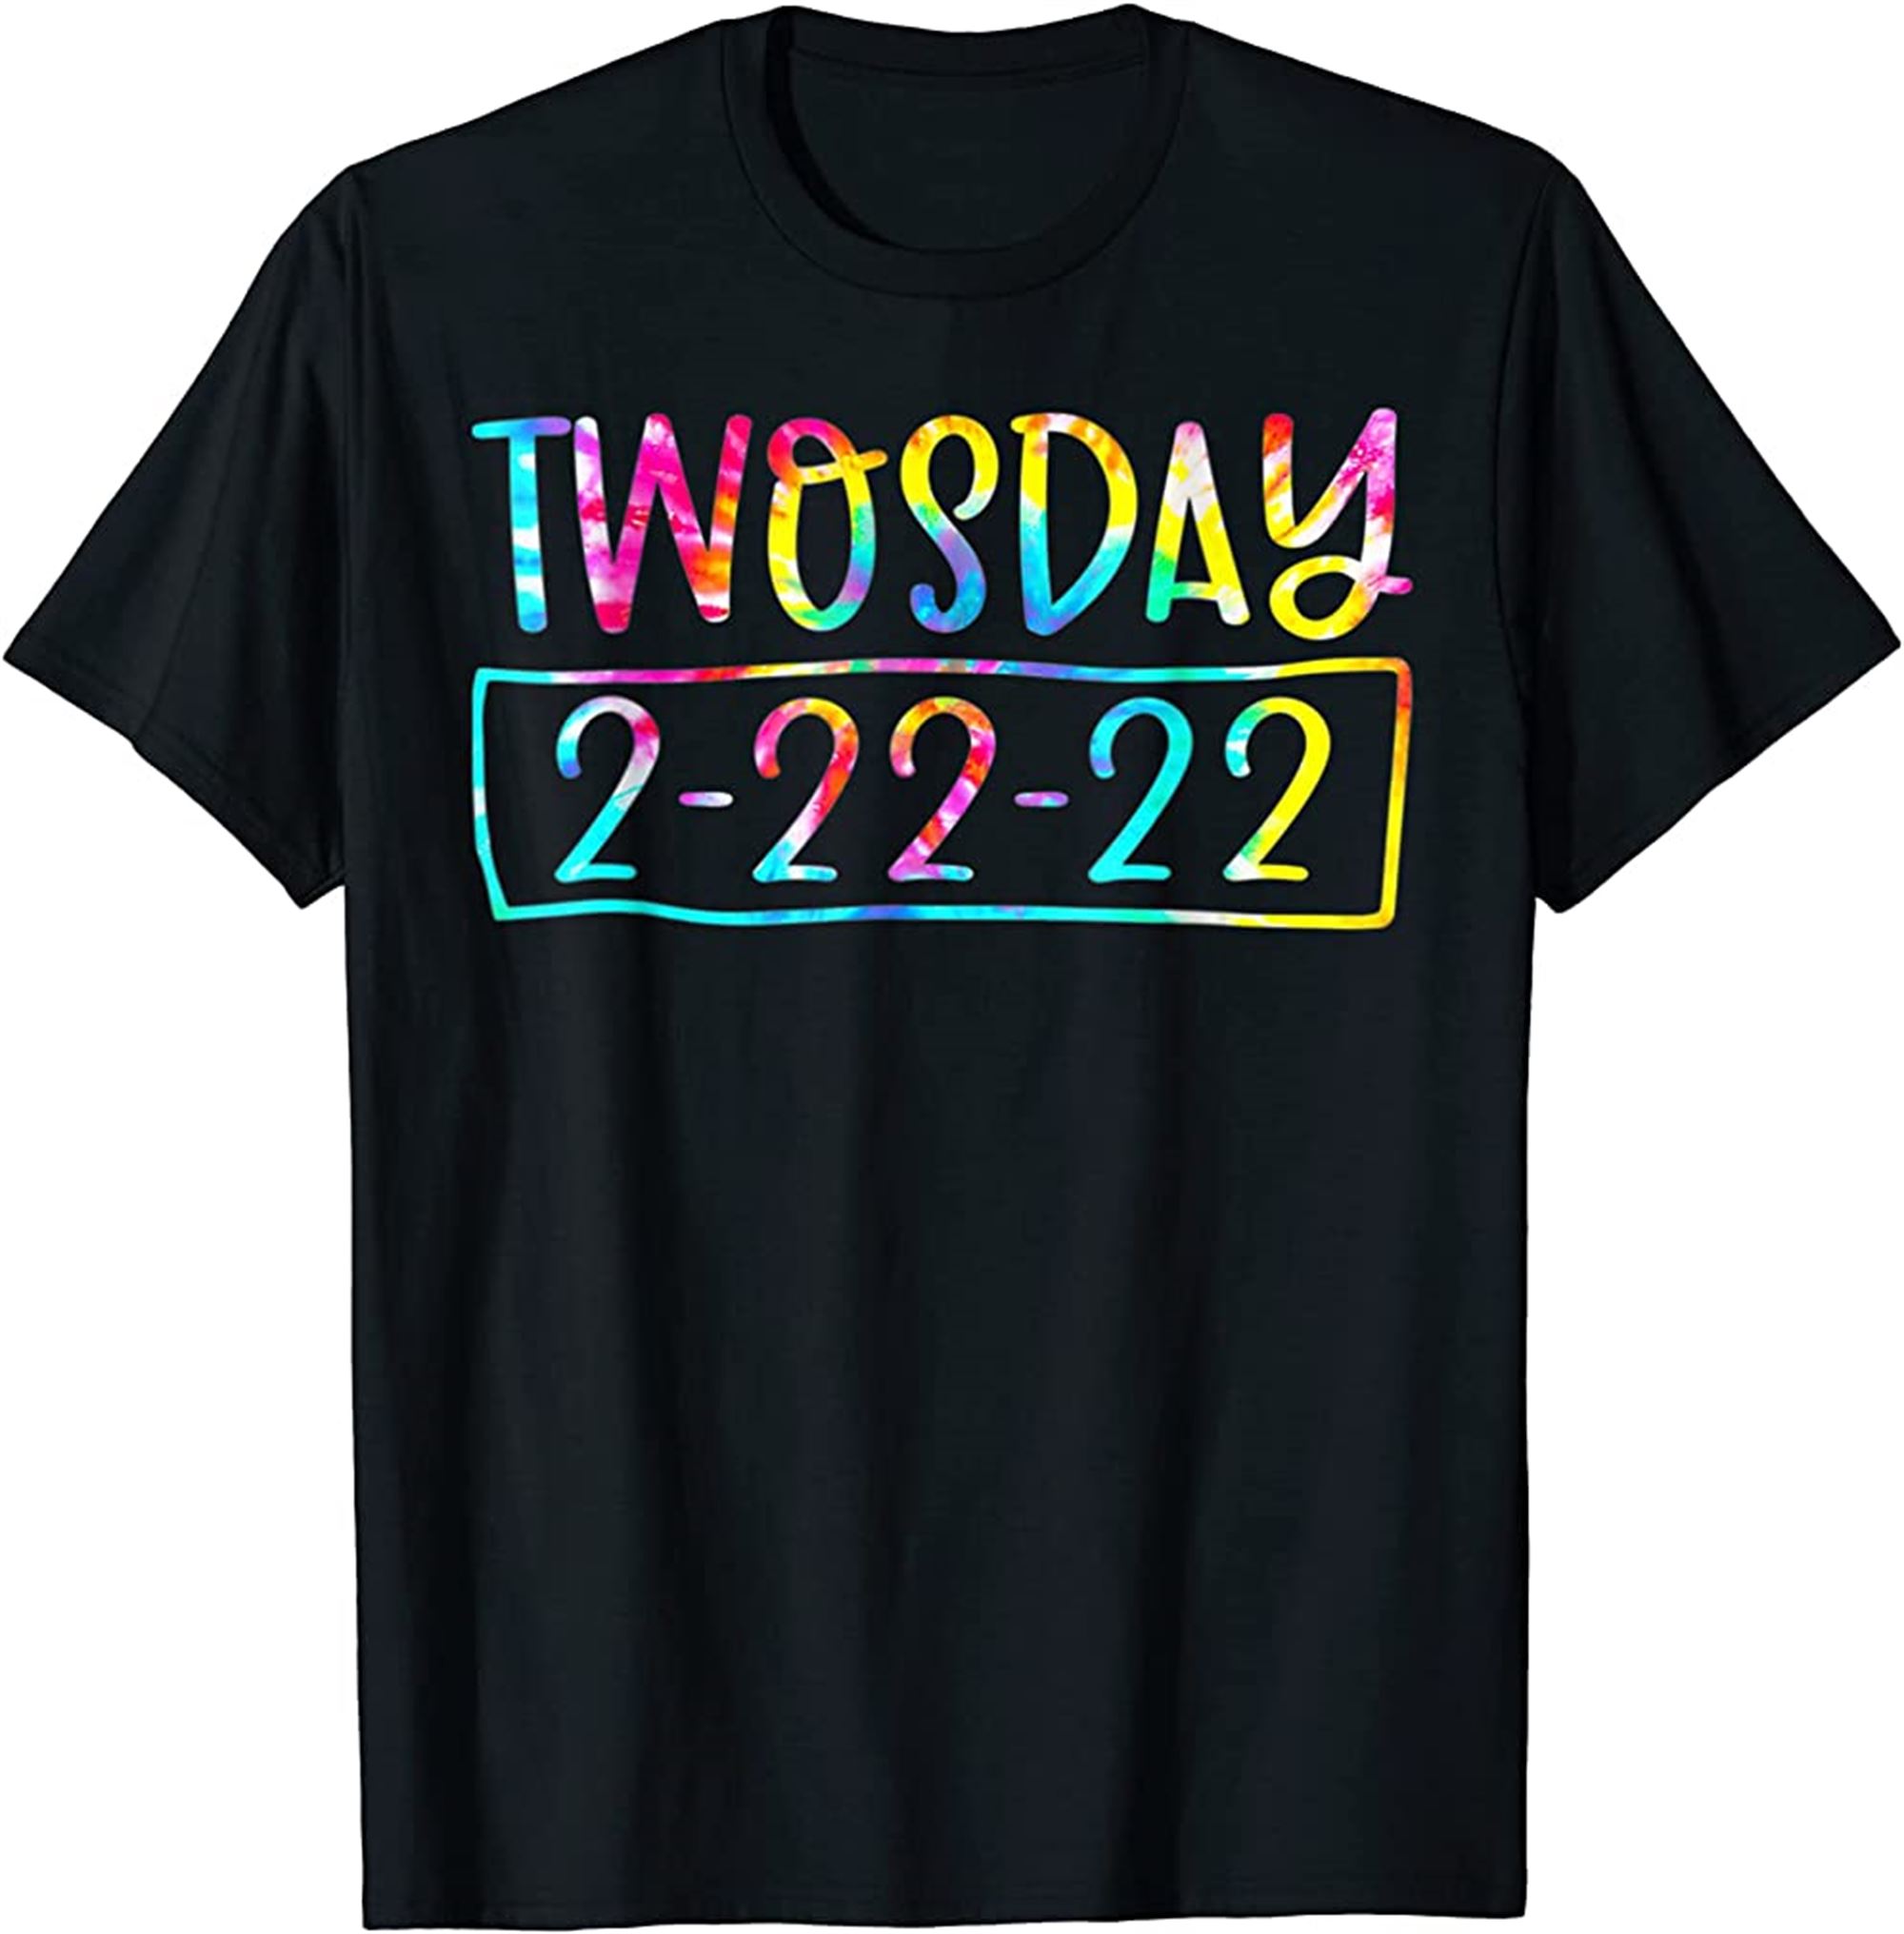 Twosday 02 22 2022 Tuesday February 2nd 2022 Funny Date Tshirt Full Size Up To 5xl